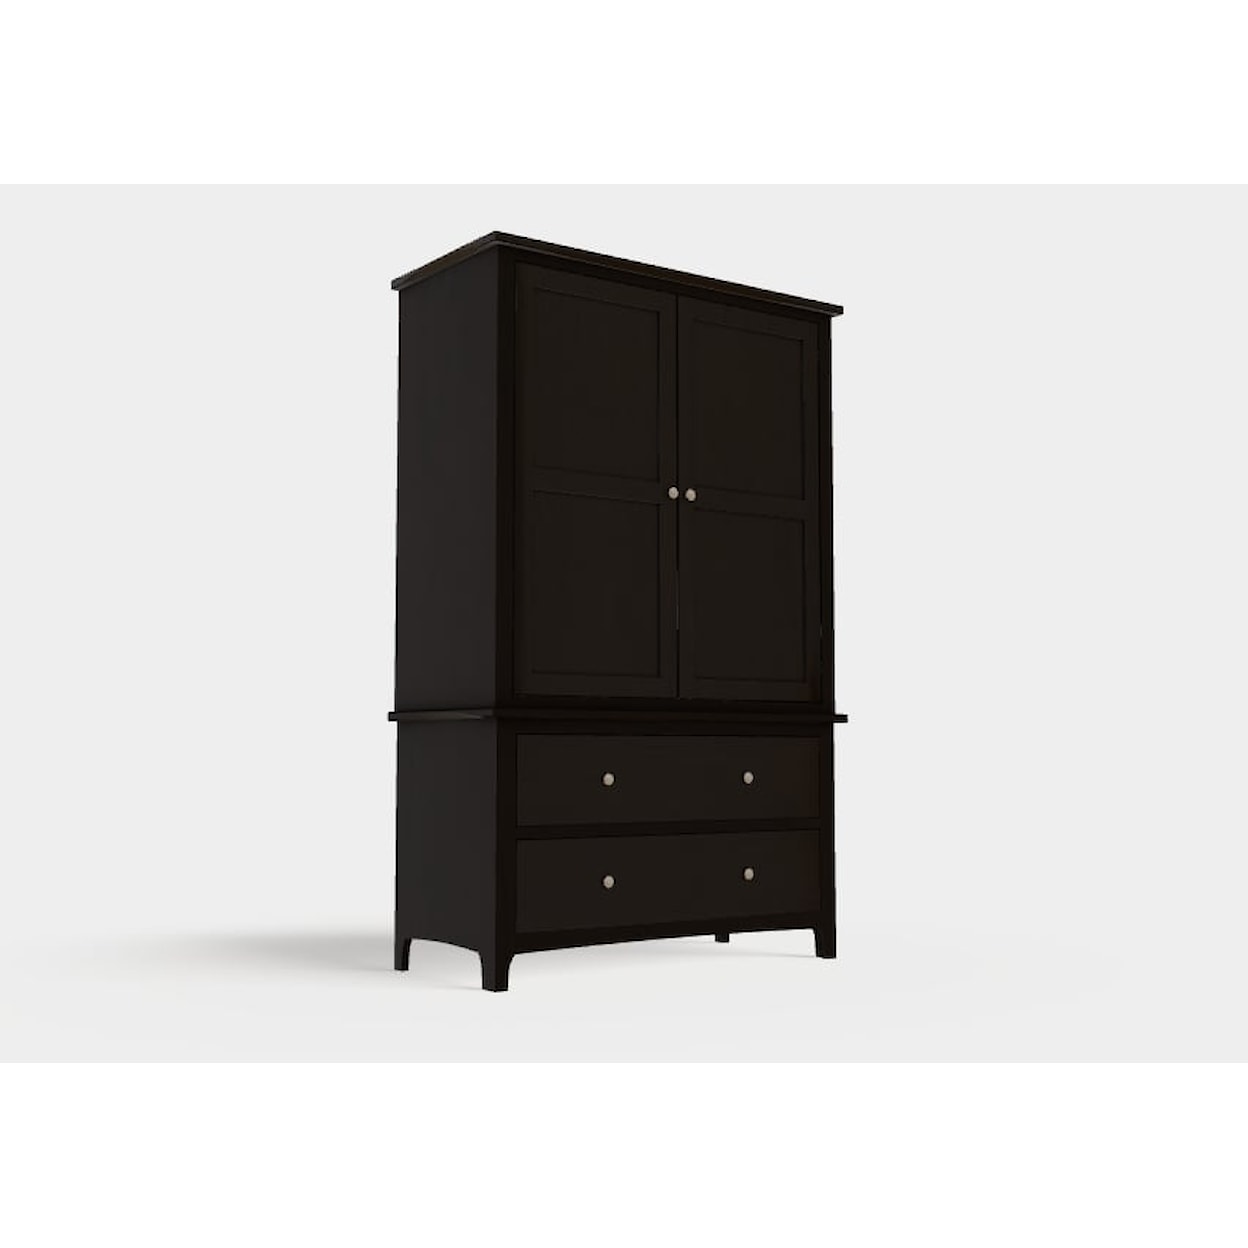 Mavin Atwood Group Atwood Armoire 2